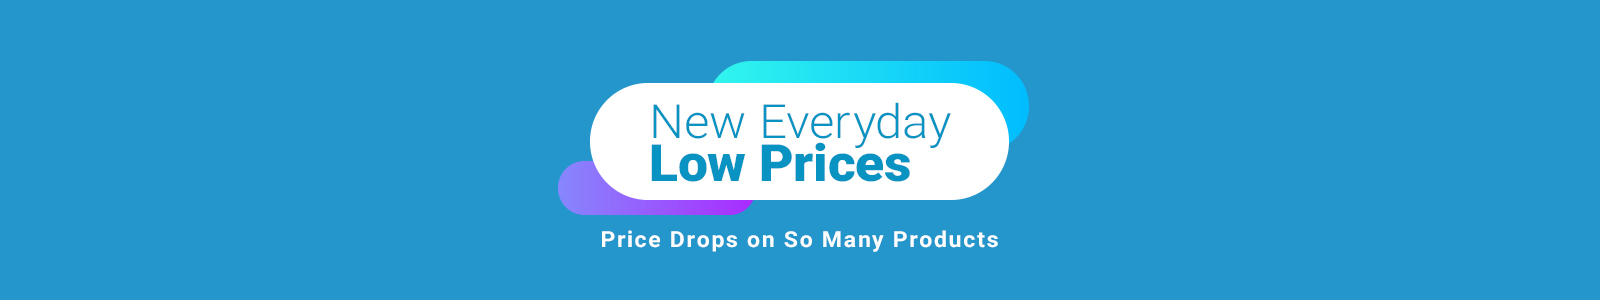 New Everyday Low Prices
Price Drops on So Many Products
Shop Now